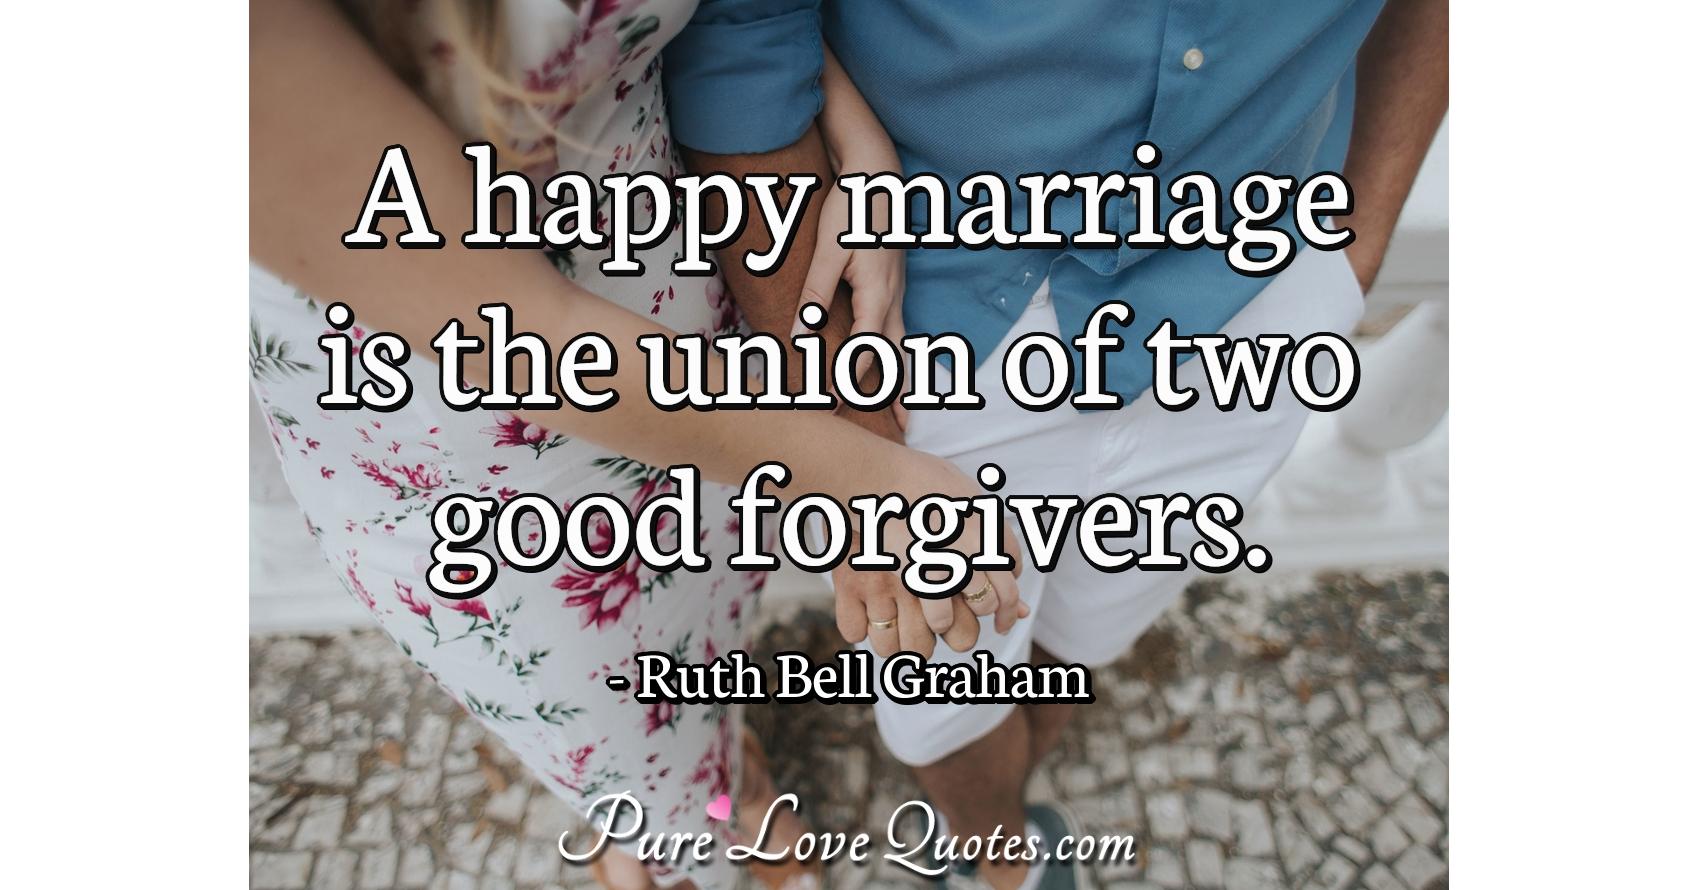 A happy marriage is the union of two good forgivers. | PureLoveQuotes